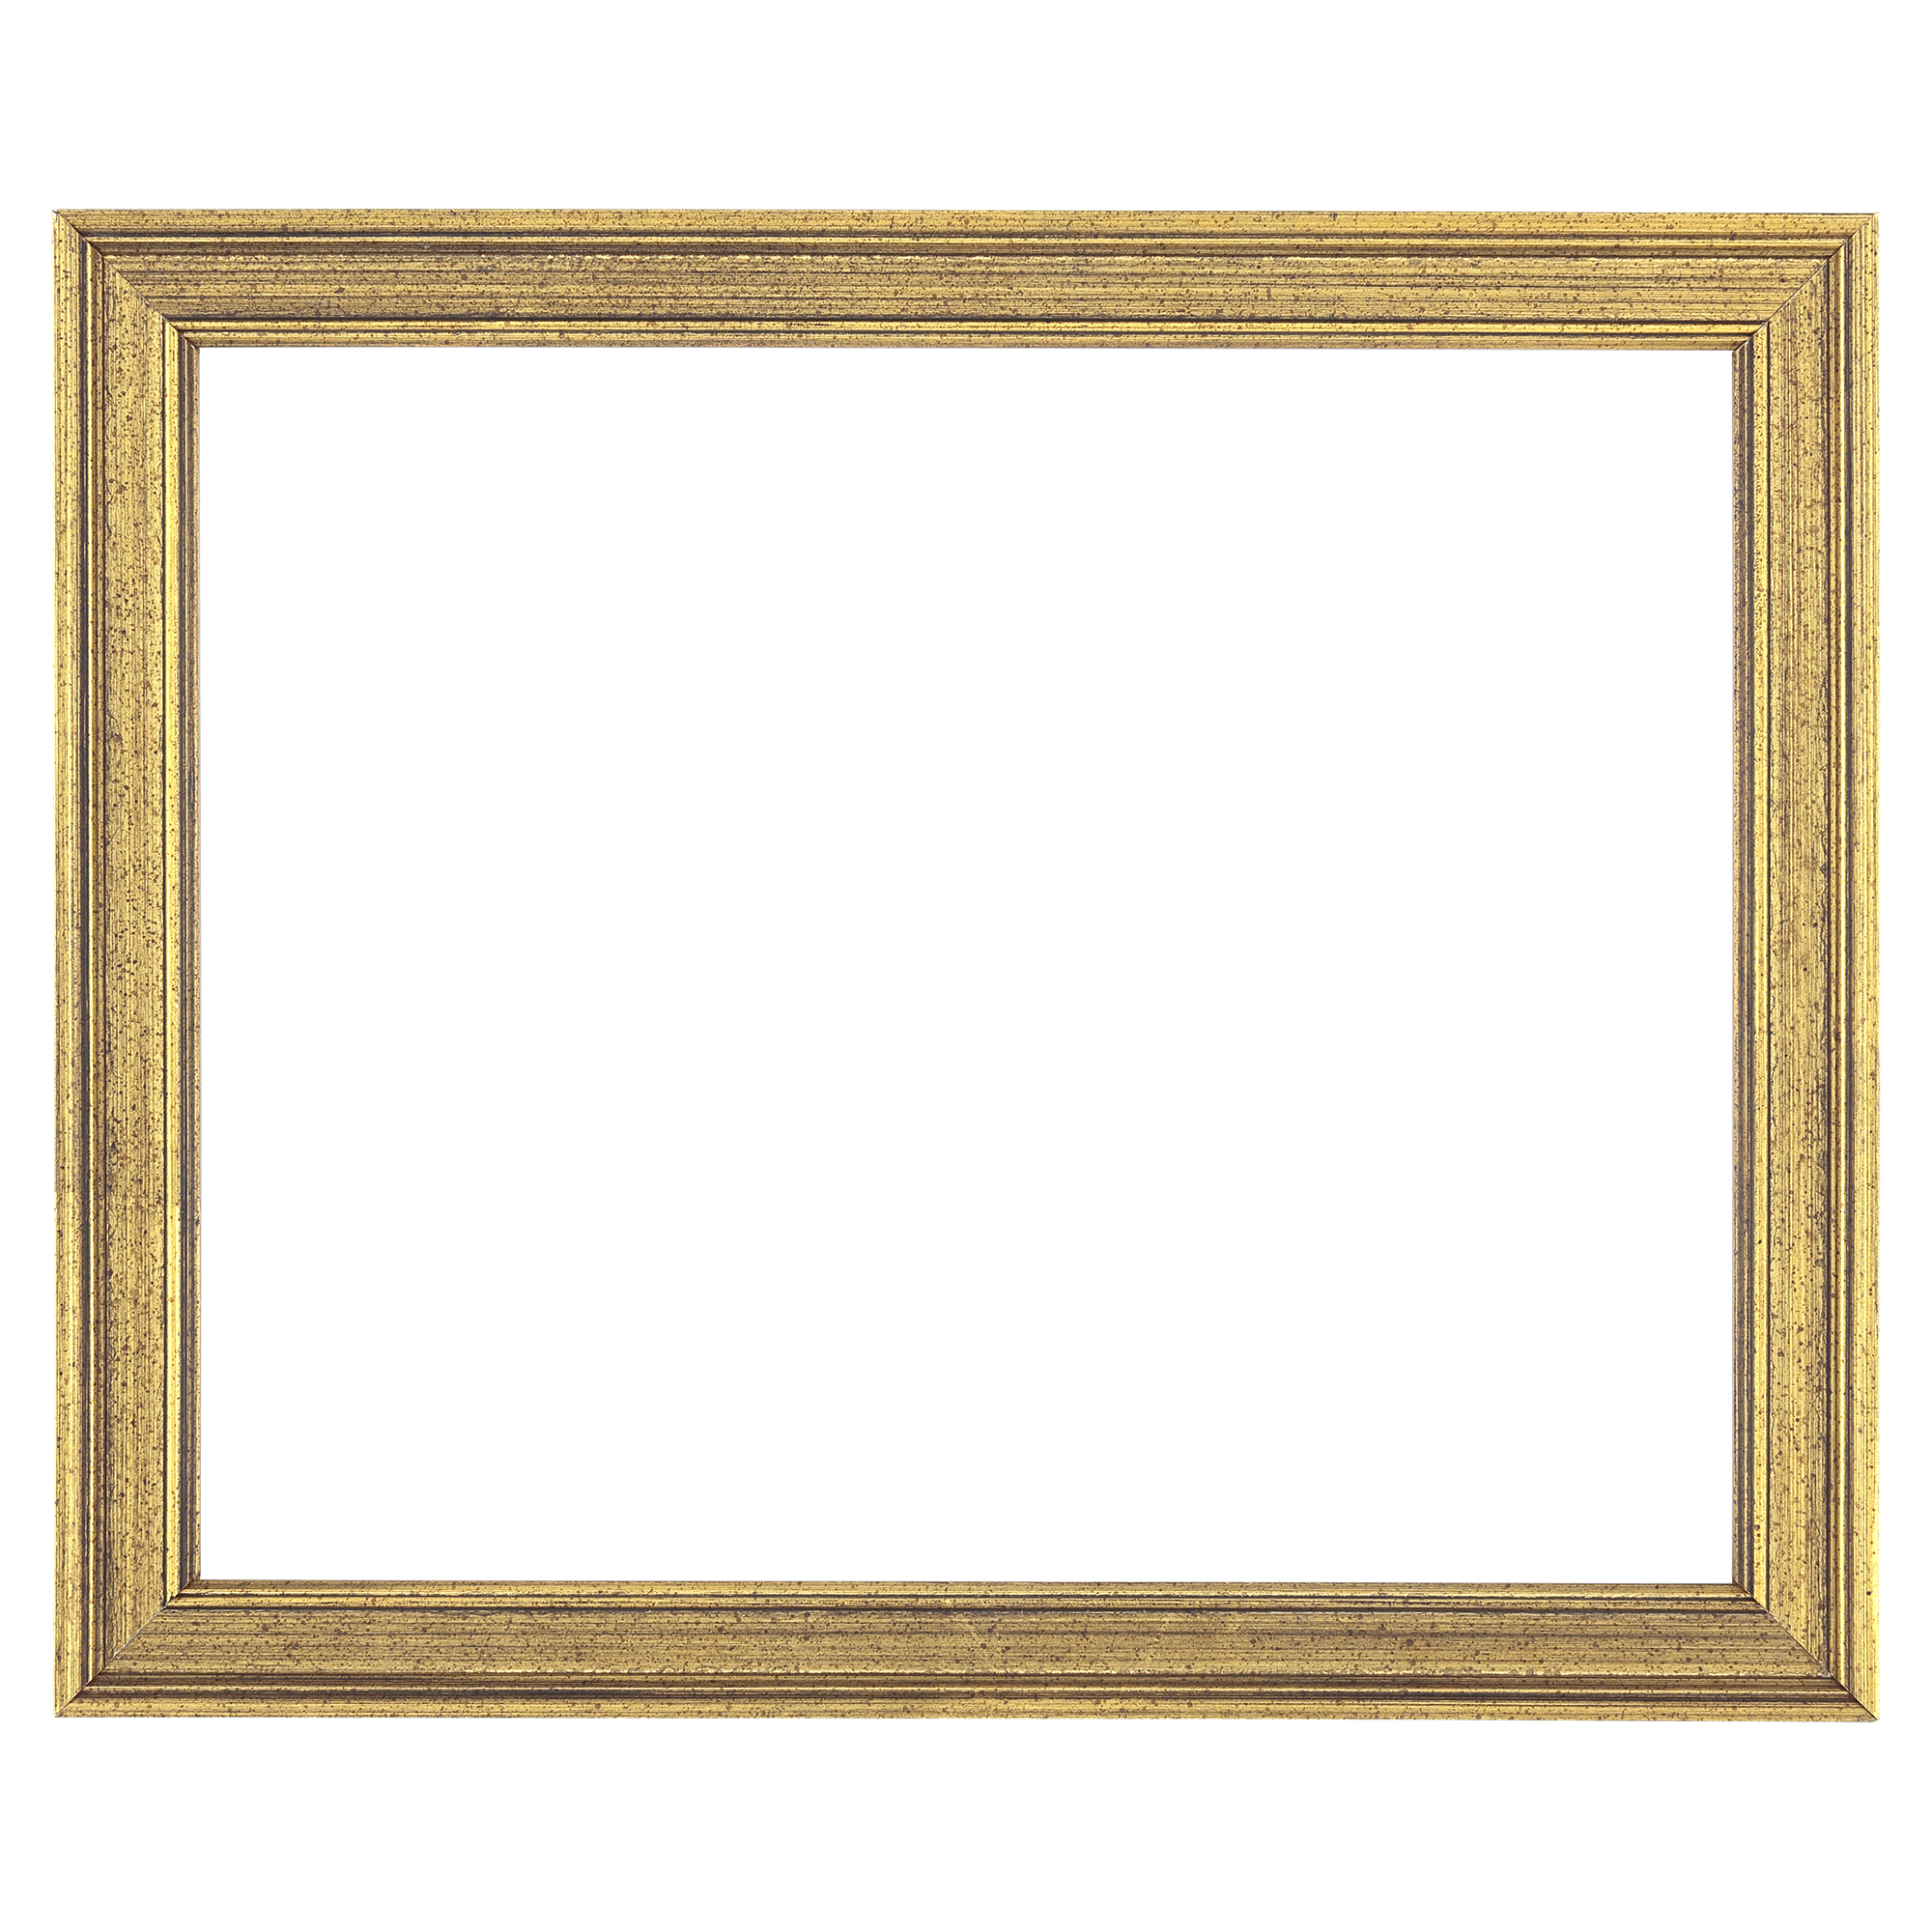 MUseum Collection Piccadilly Artist Vintage Picture Frames - 16x20 Gold - 6 Pack of Frames for 3/4 Thick Canvas, Paper and Panels, Museum Quality Wooden Antique Photo Frame - image 1 of 4